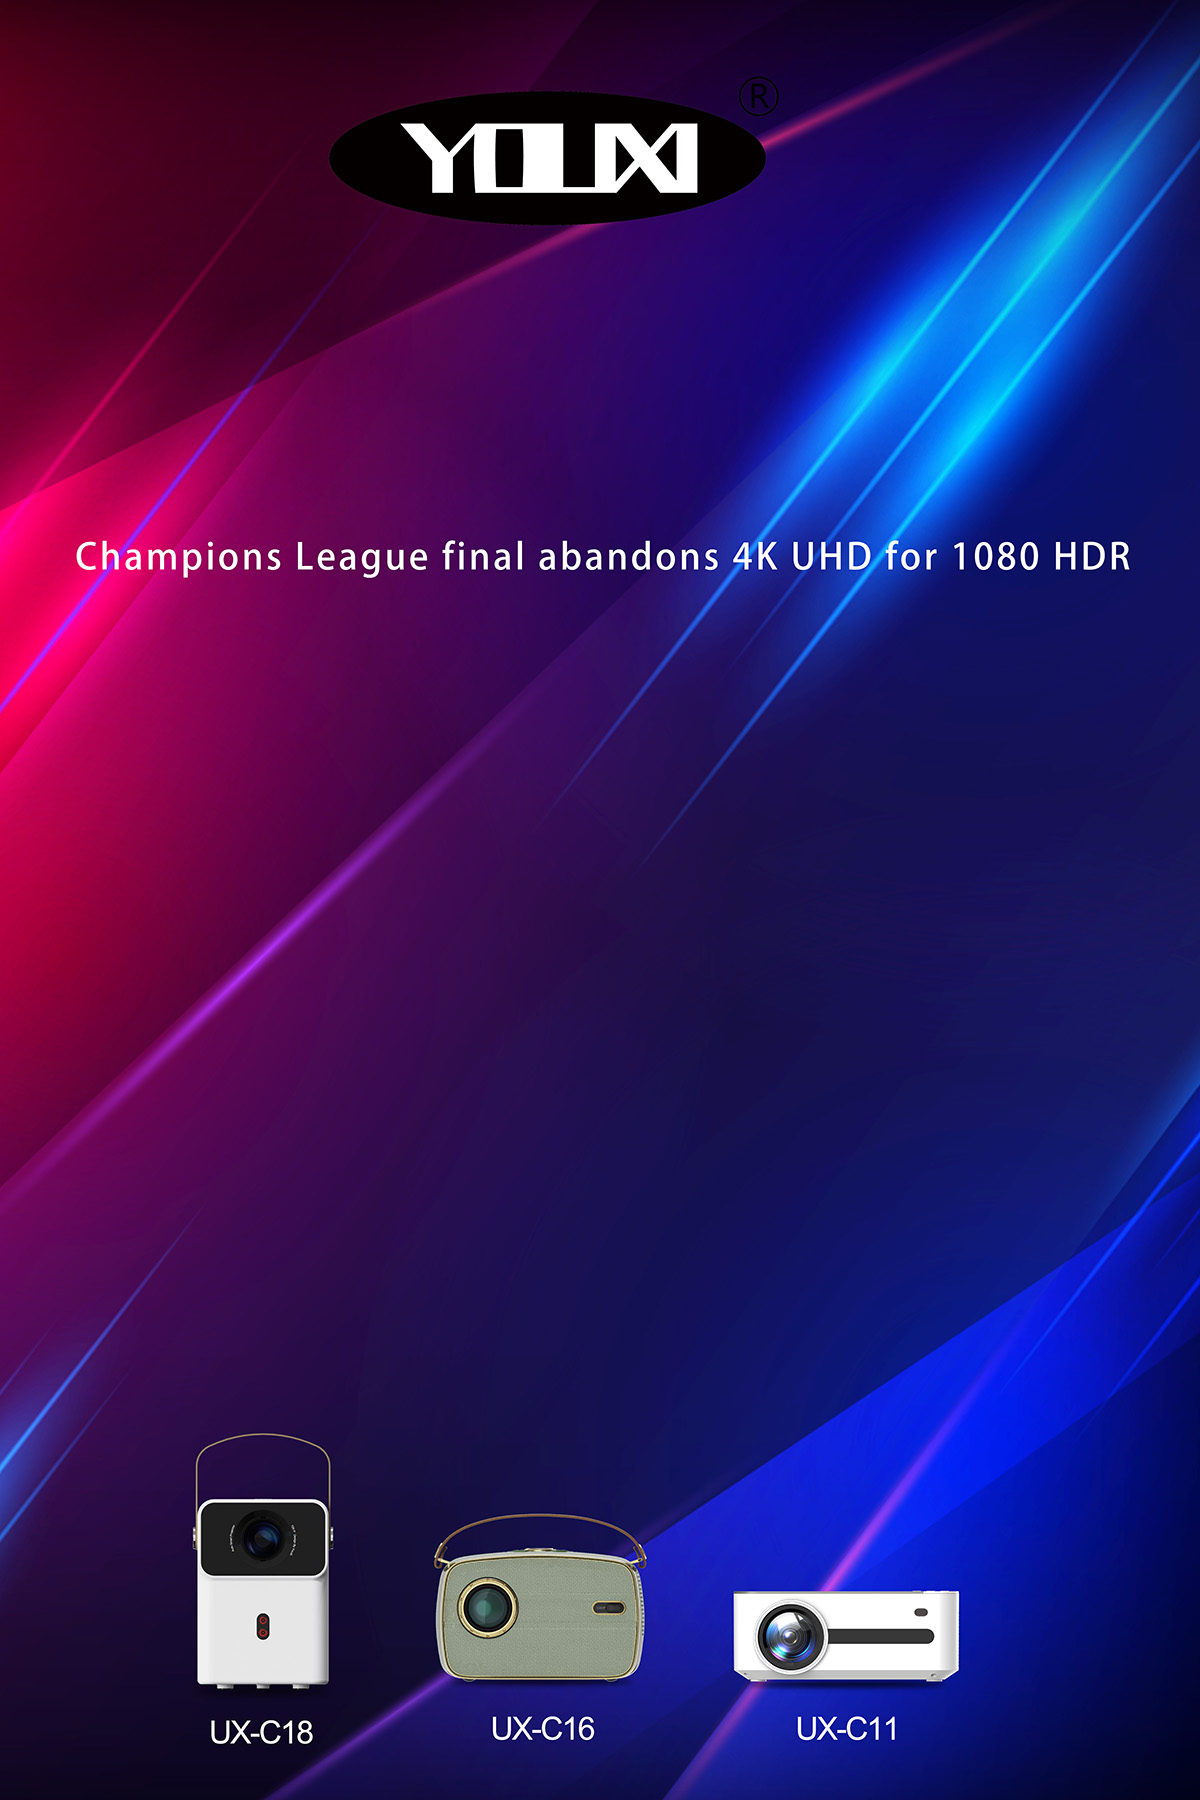 Champions League final abandons 4K UHD for 1080 HDR